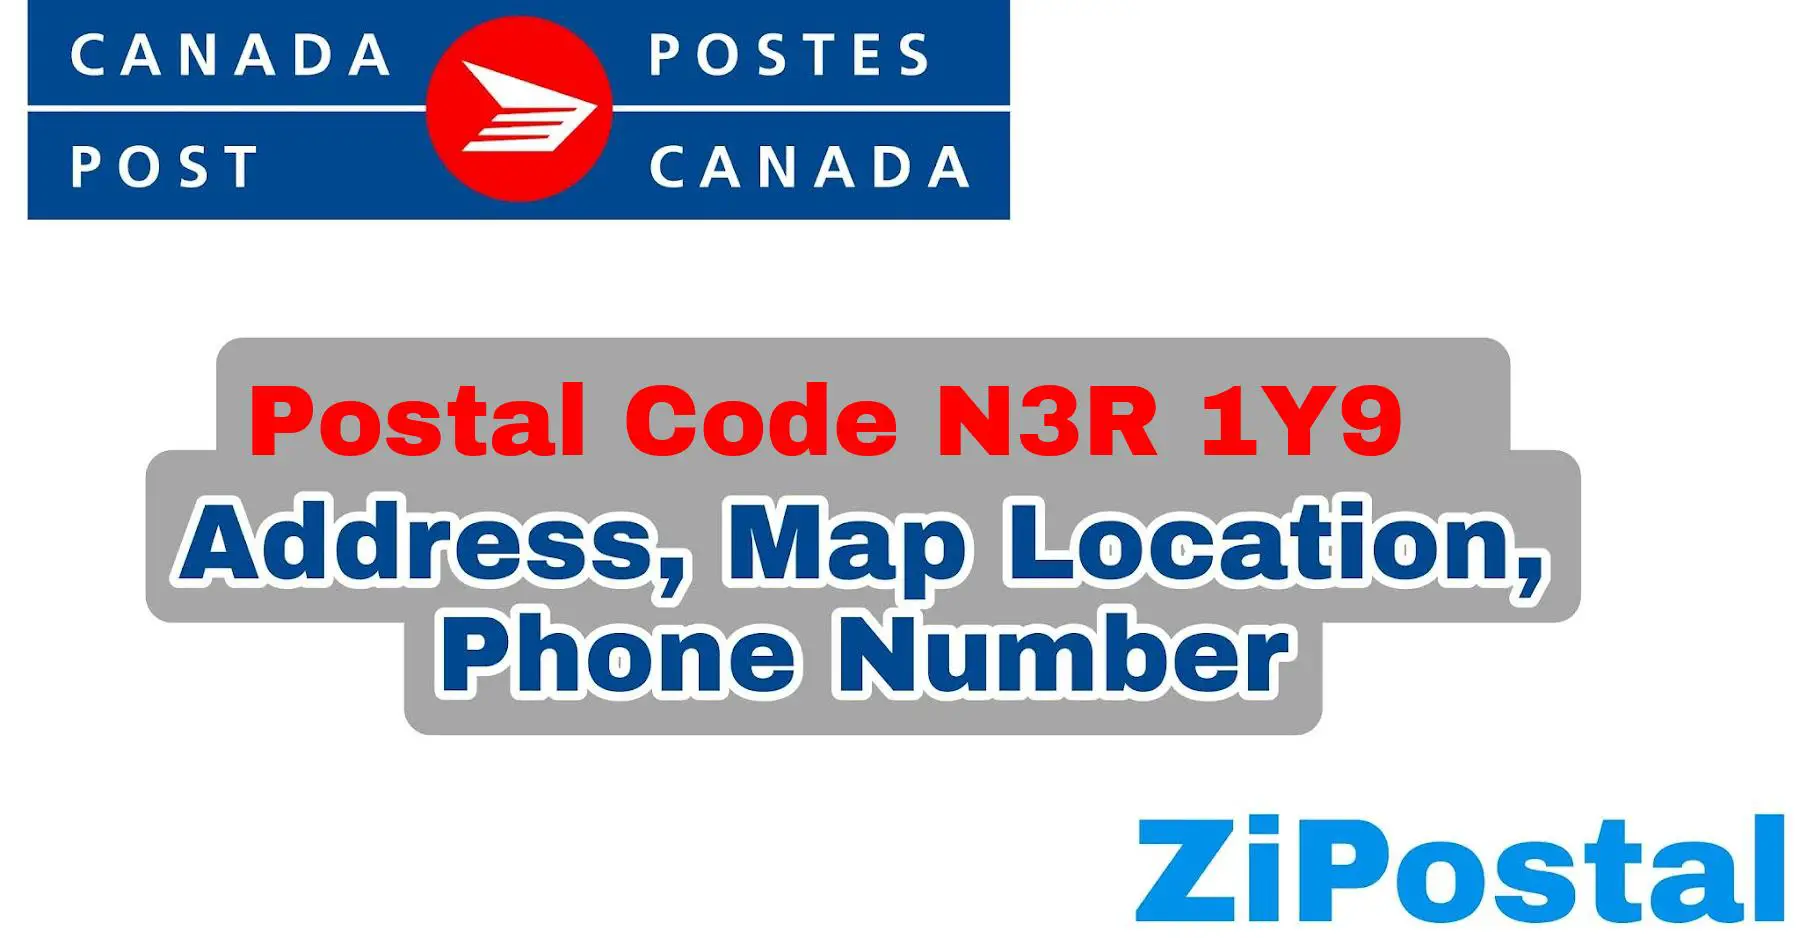 Postal Code N3R 1Y9 Address Map Location and Phone Number